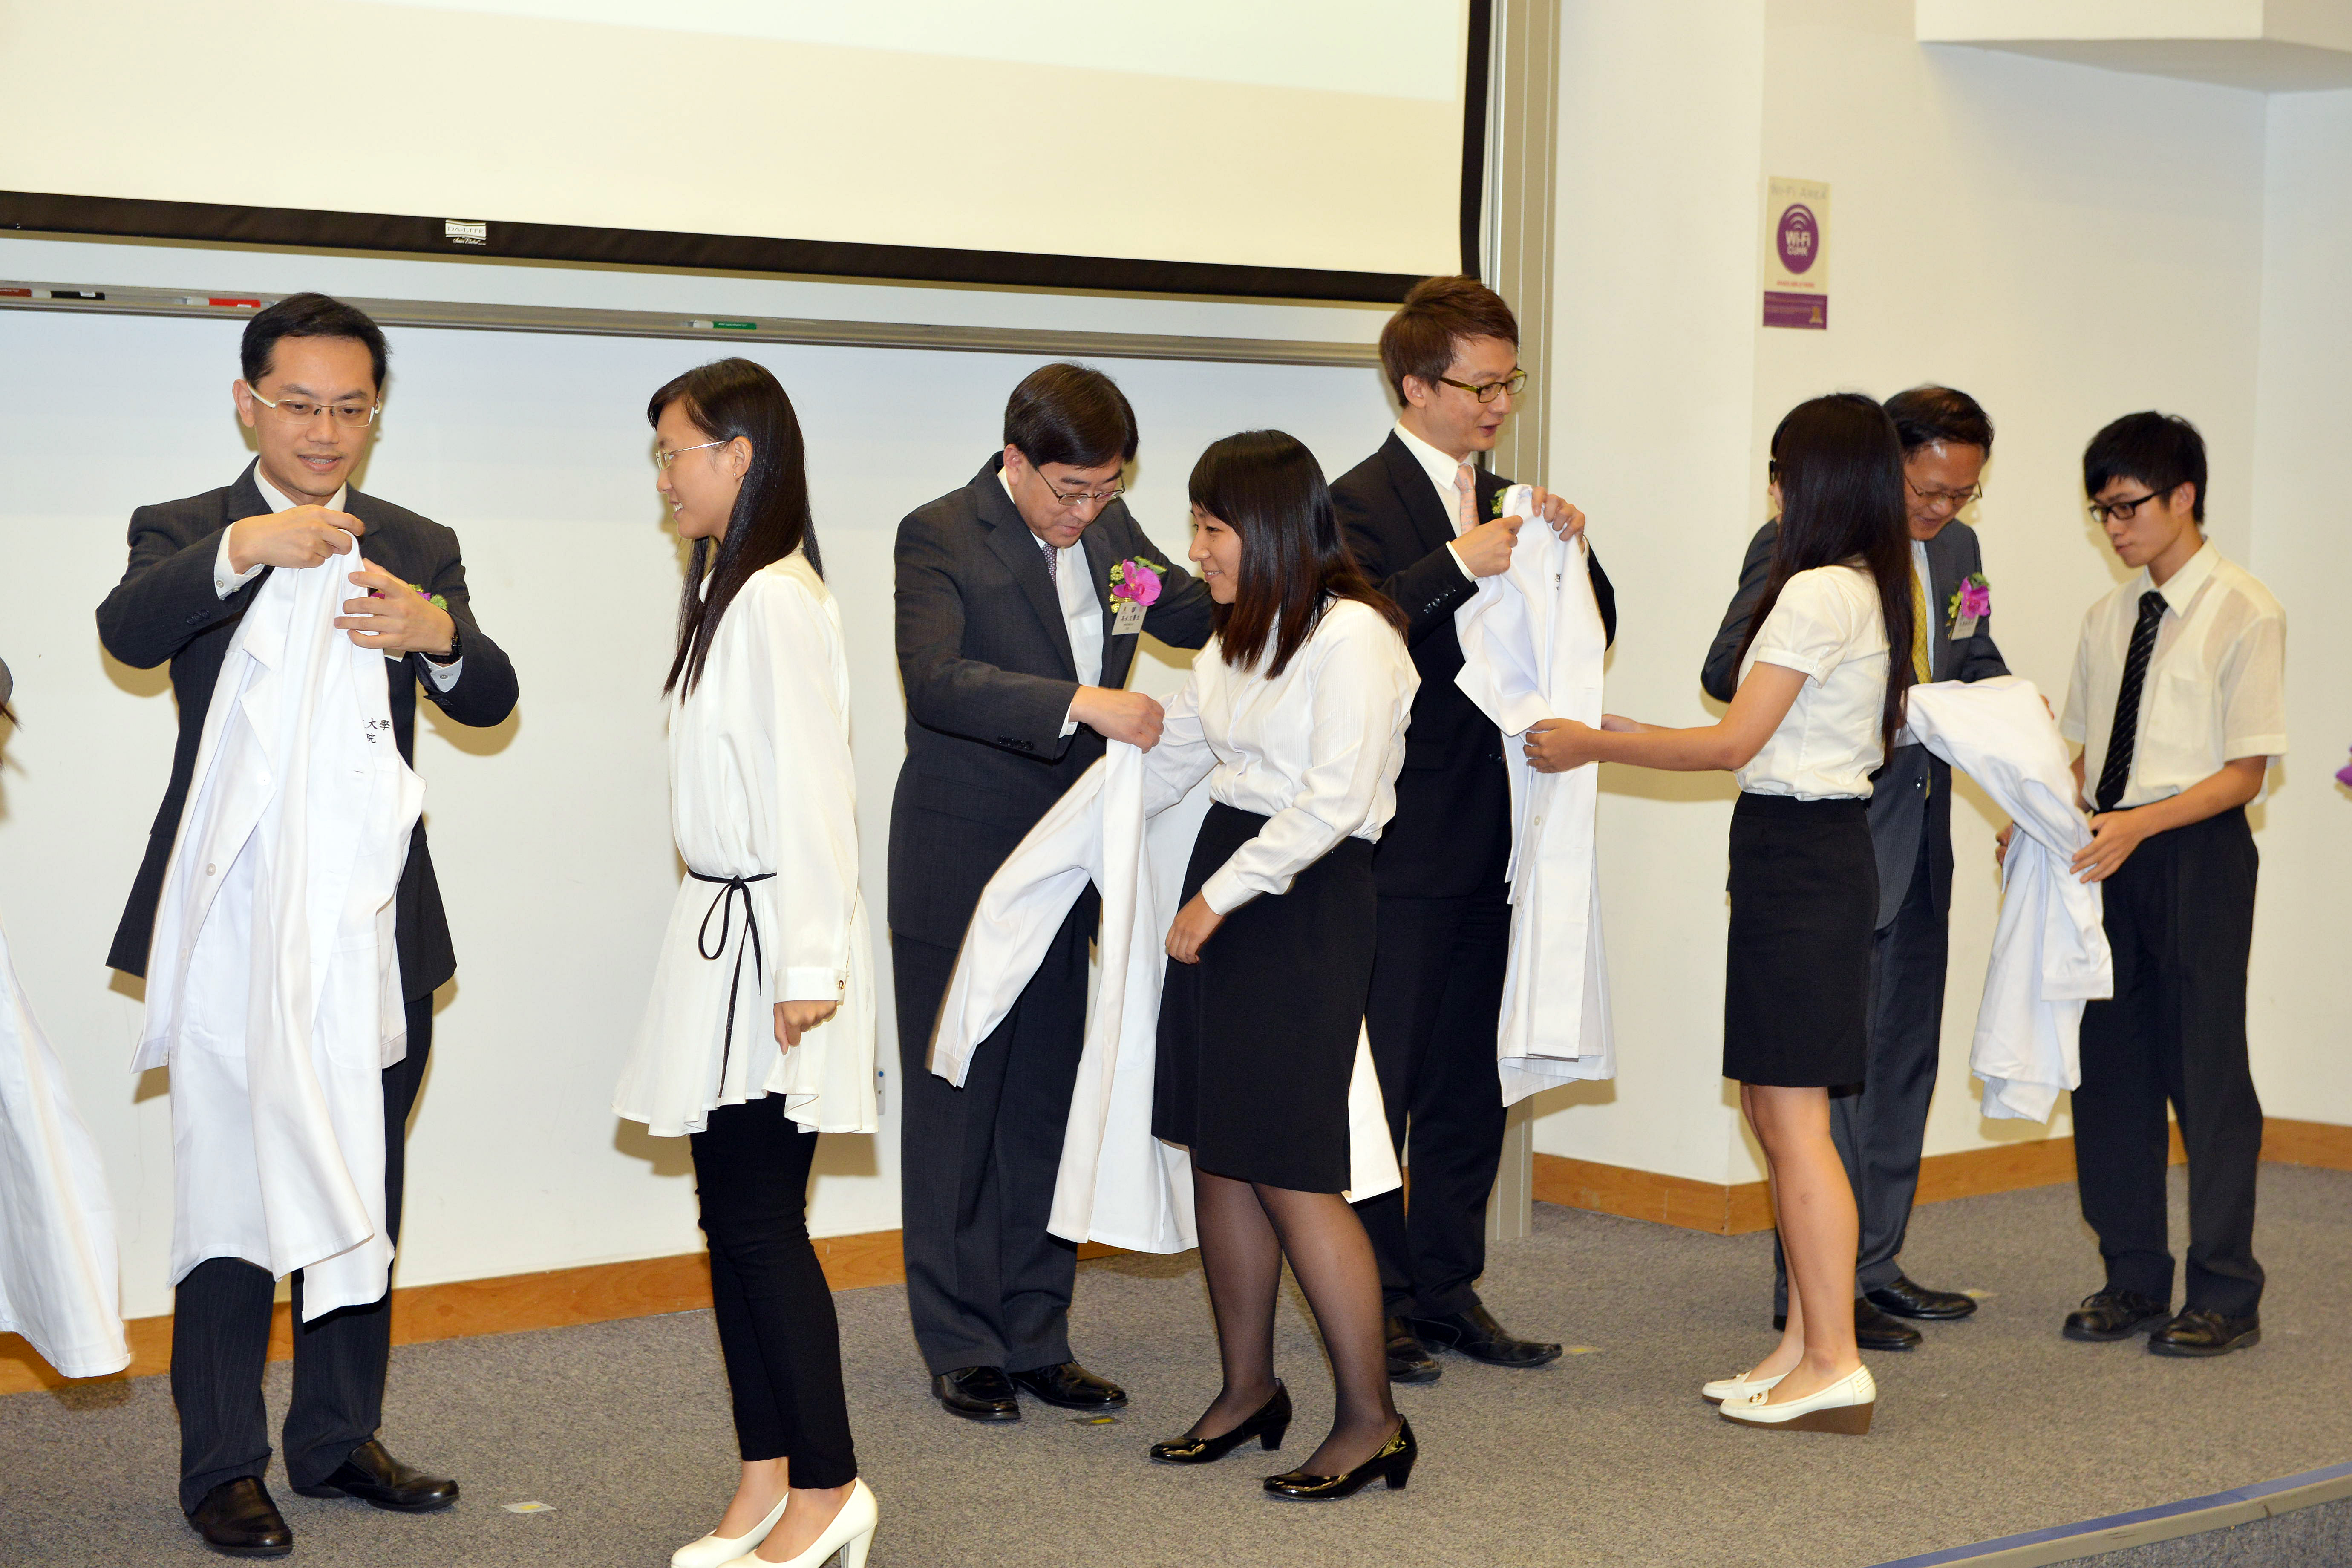 The officiating guests put the white coats on the Chinese medicine freshmen at the White Coat Ceremony.